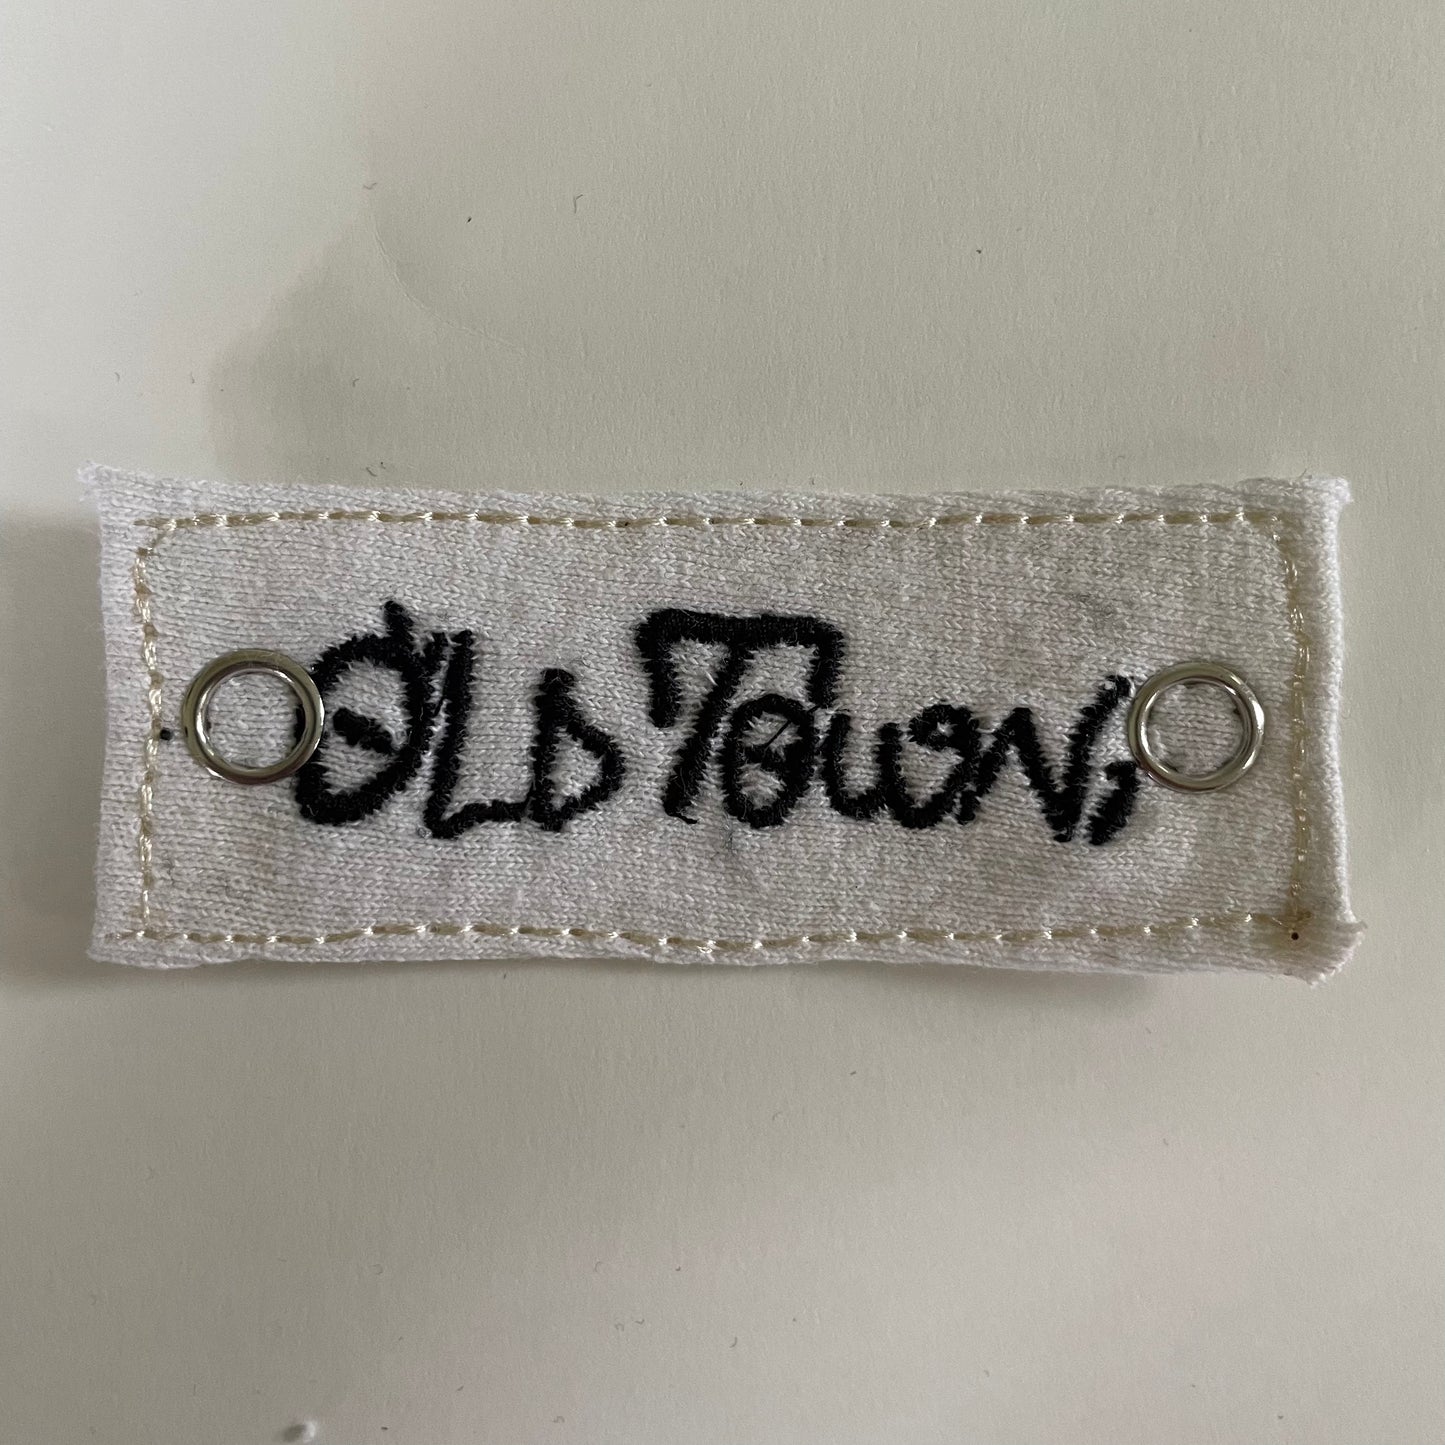 Branded Patch | Old Town